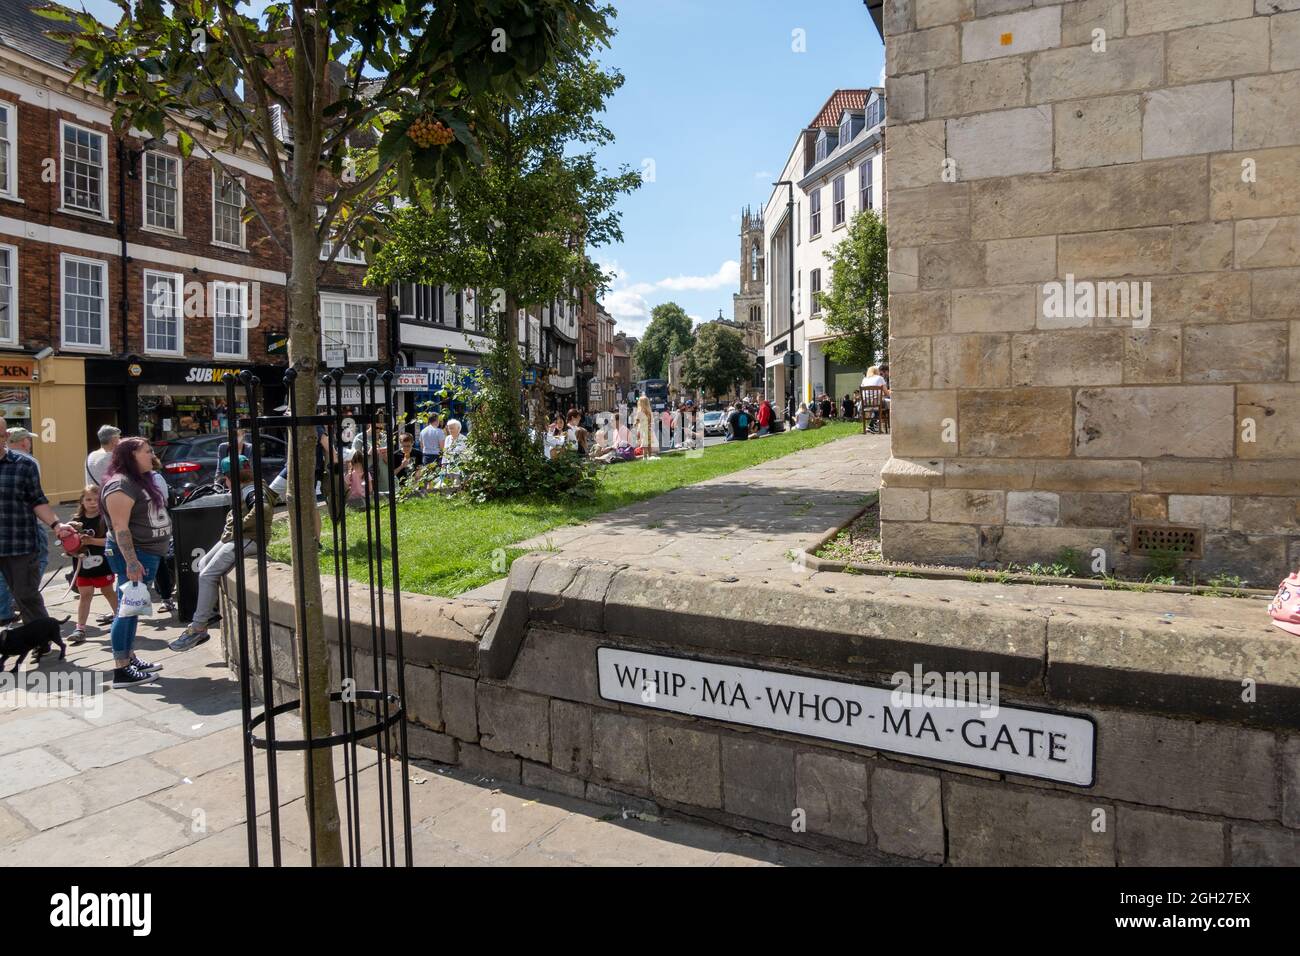 Whip-Ma-Whop-Ma-Gate street sign, York, Yorkshire Stock Photo